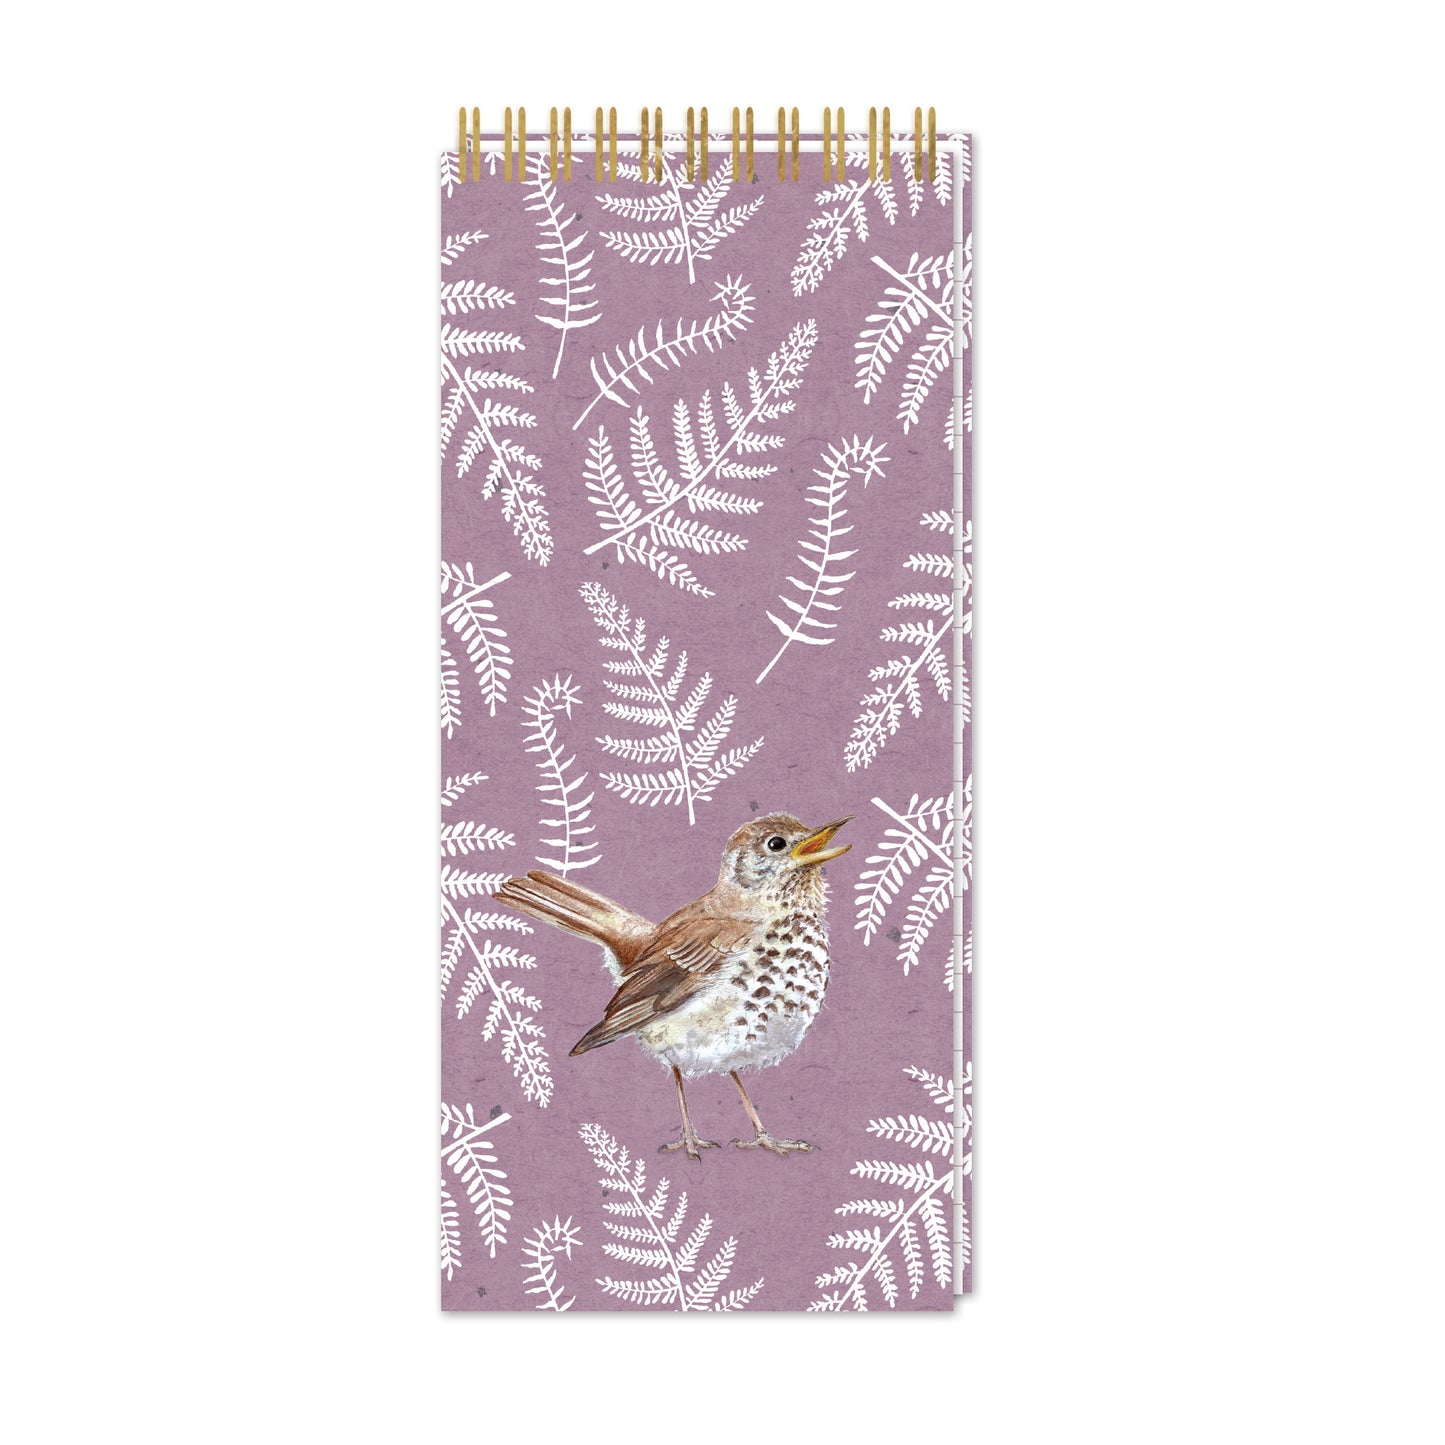 RSPB - In The Wild Stationery - List Pad (Wiro)